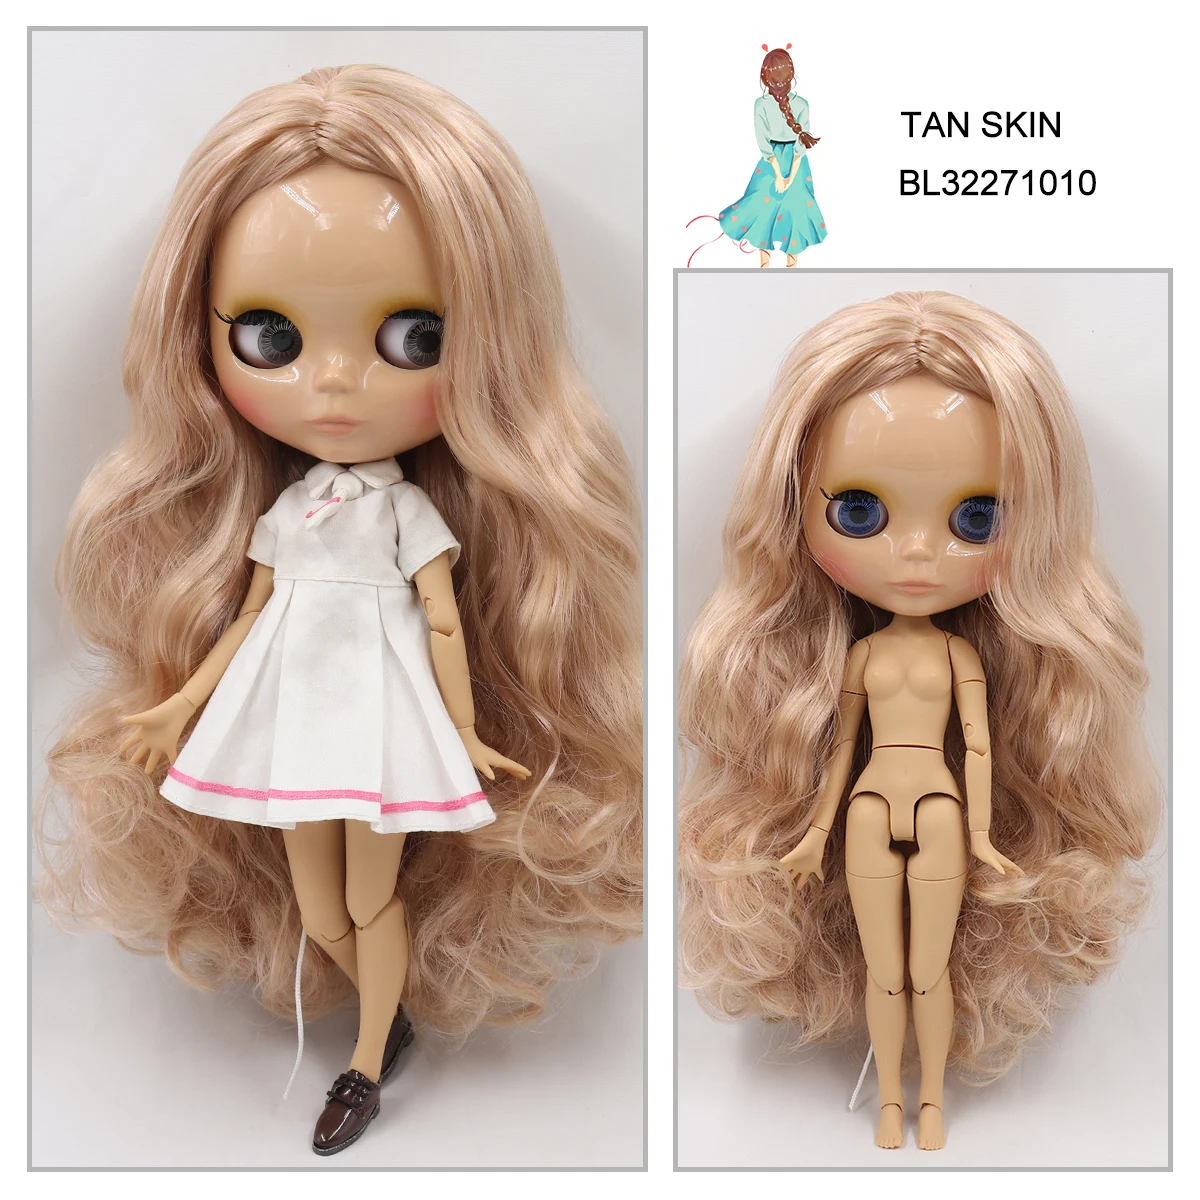 Neo Blythe Doll with Pink Hair, Tan Skin, Shiny Cute Face & Factory Jointed Body 1